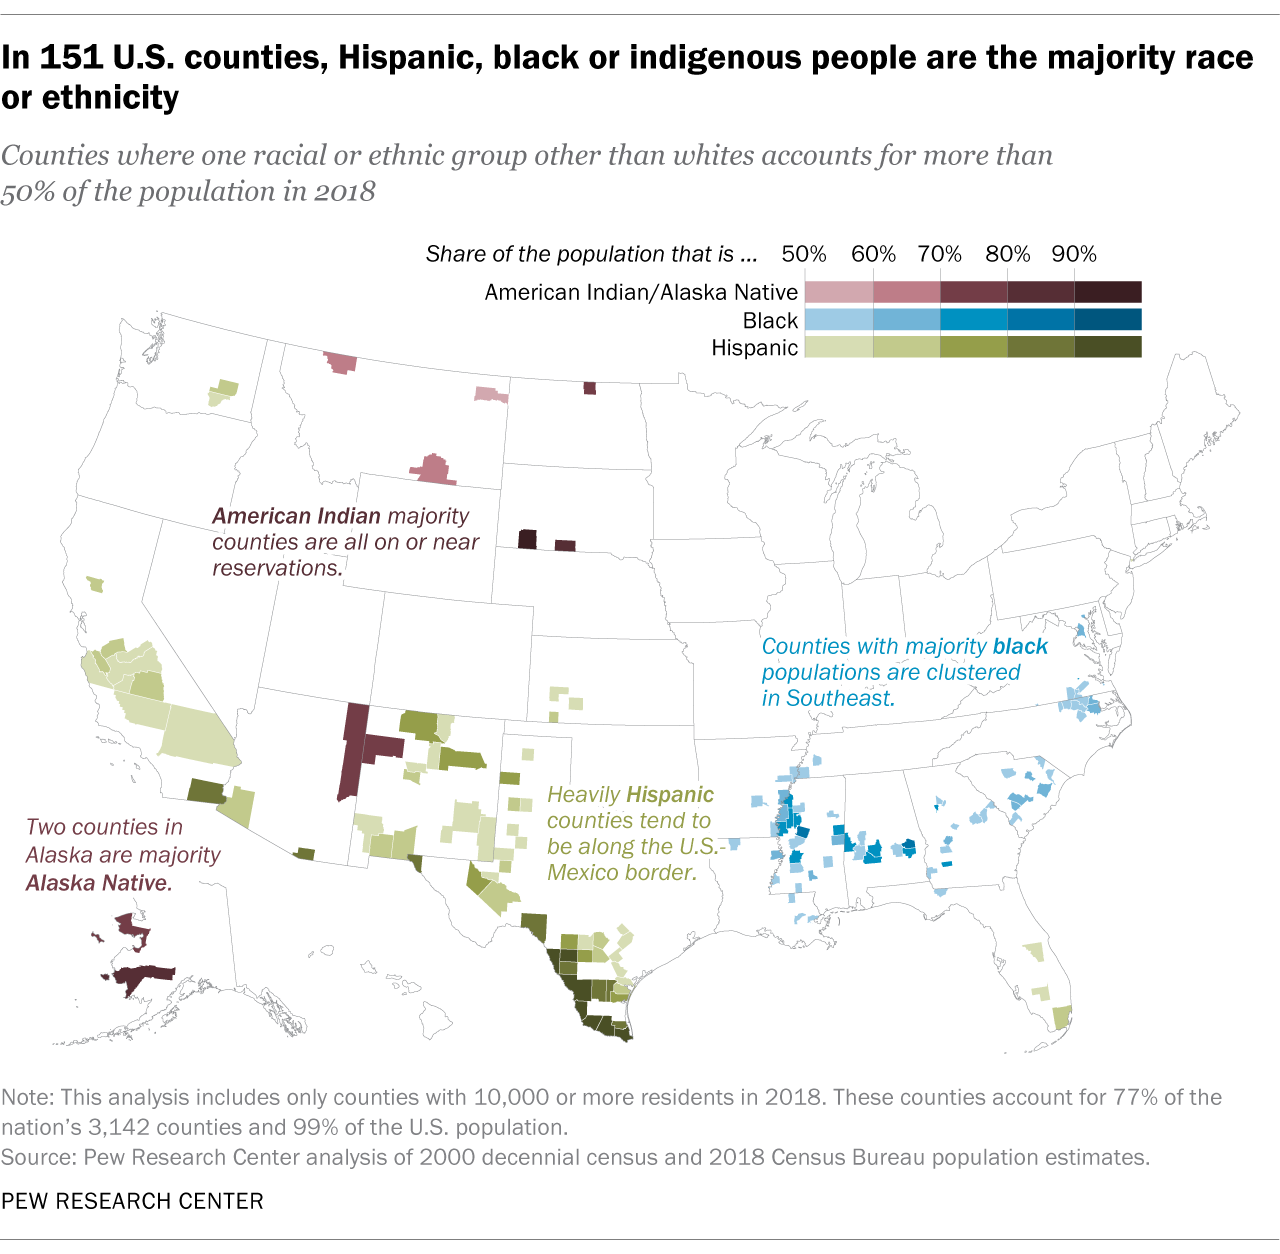 In 151 U.S. counties, Hispanic, black or indigenous people are the majority race or ethnicity